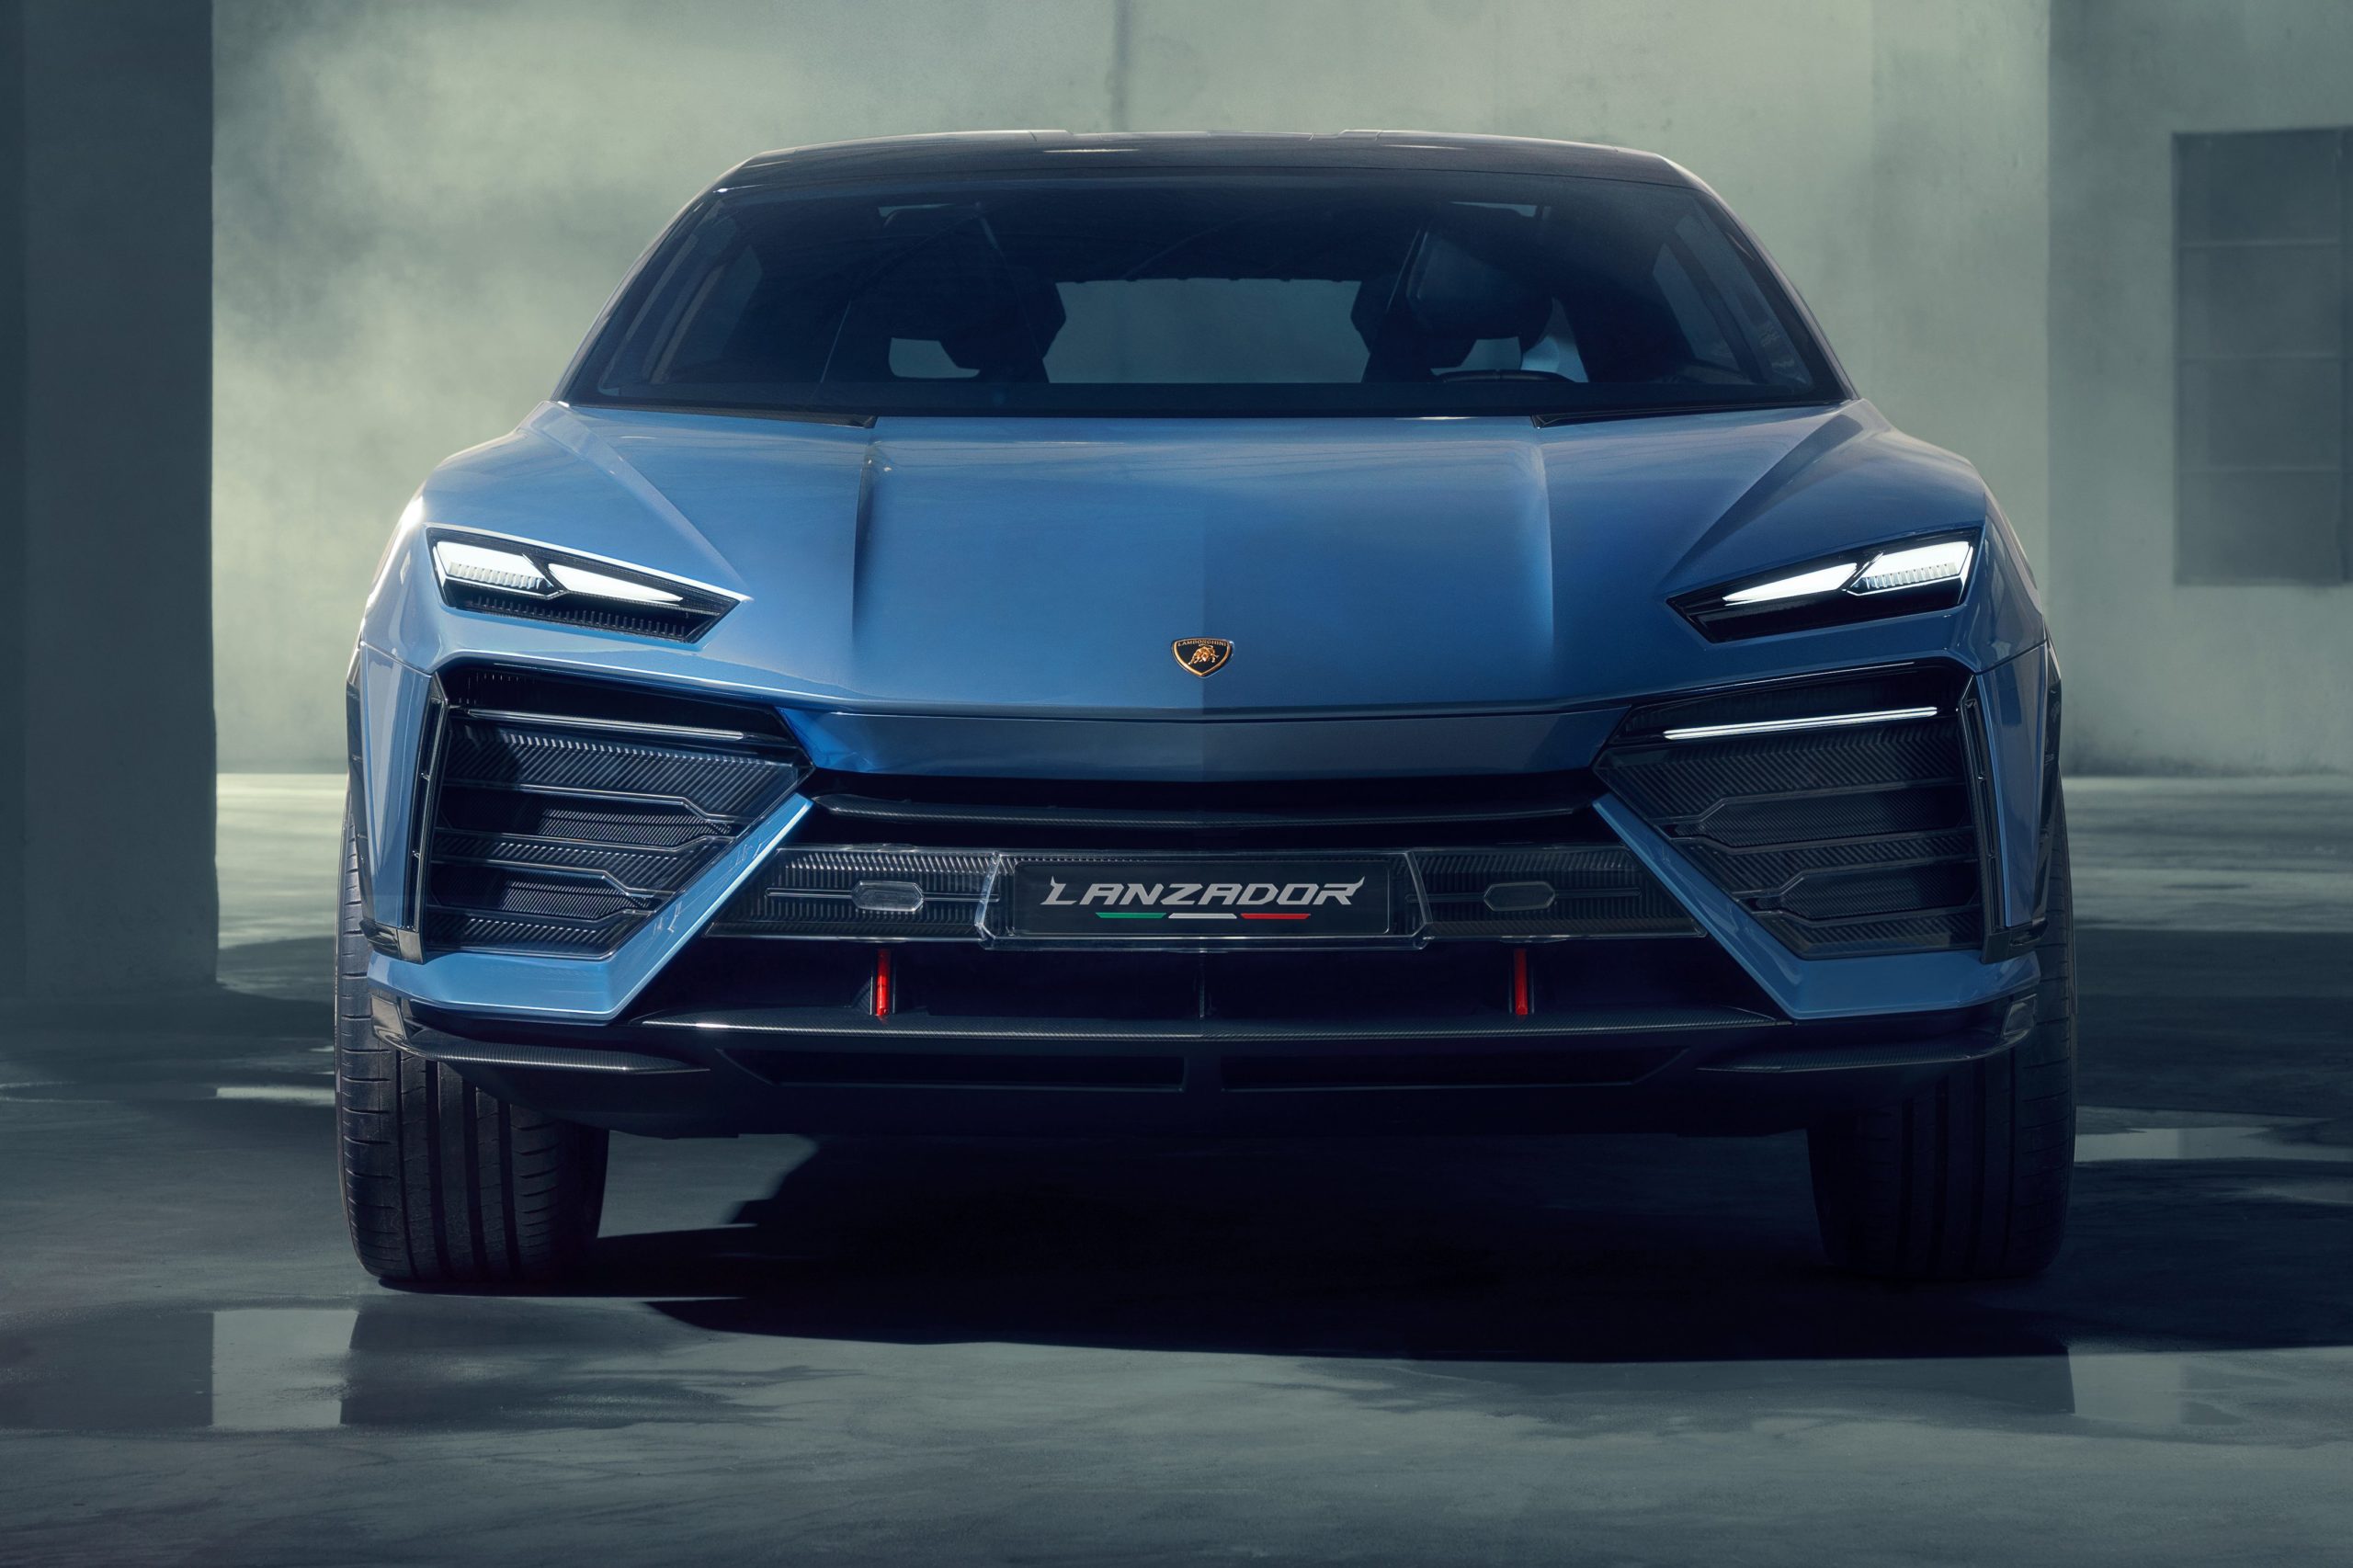 lamborghini reveals its first electric car, a four-door ultra-gt with over 1,300bhp